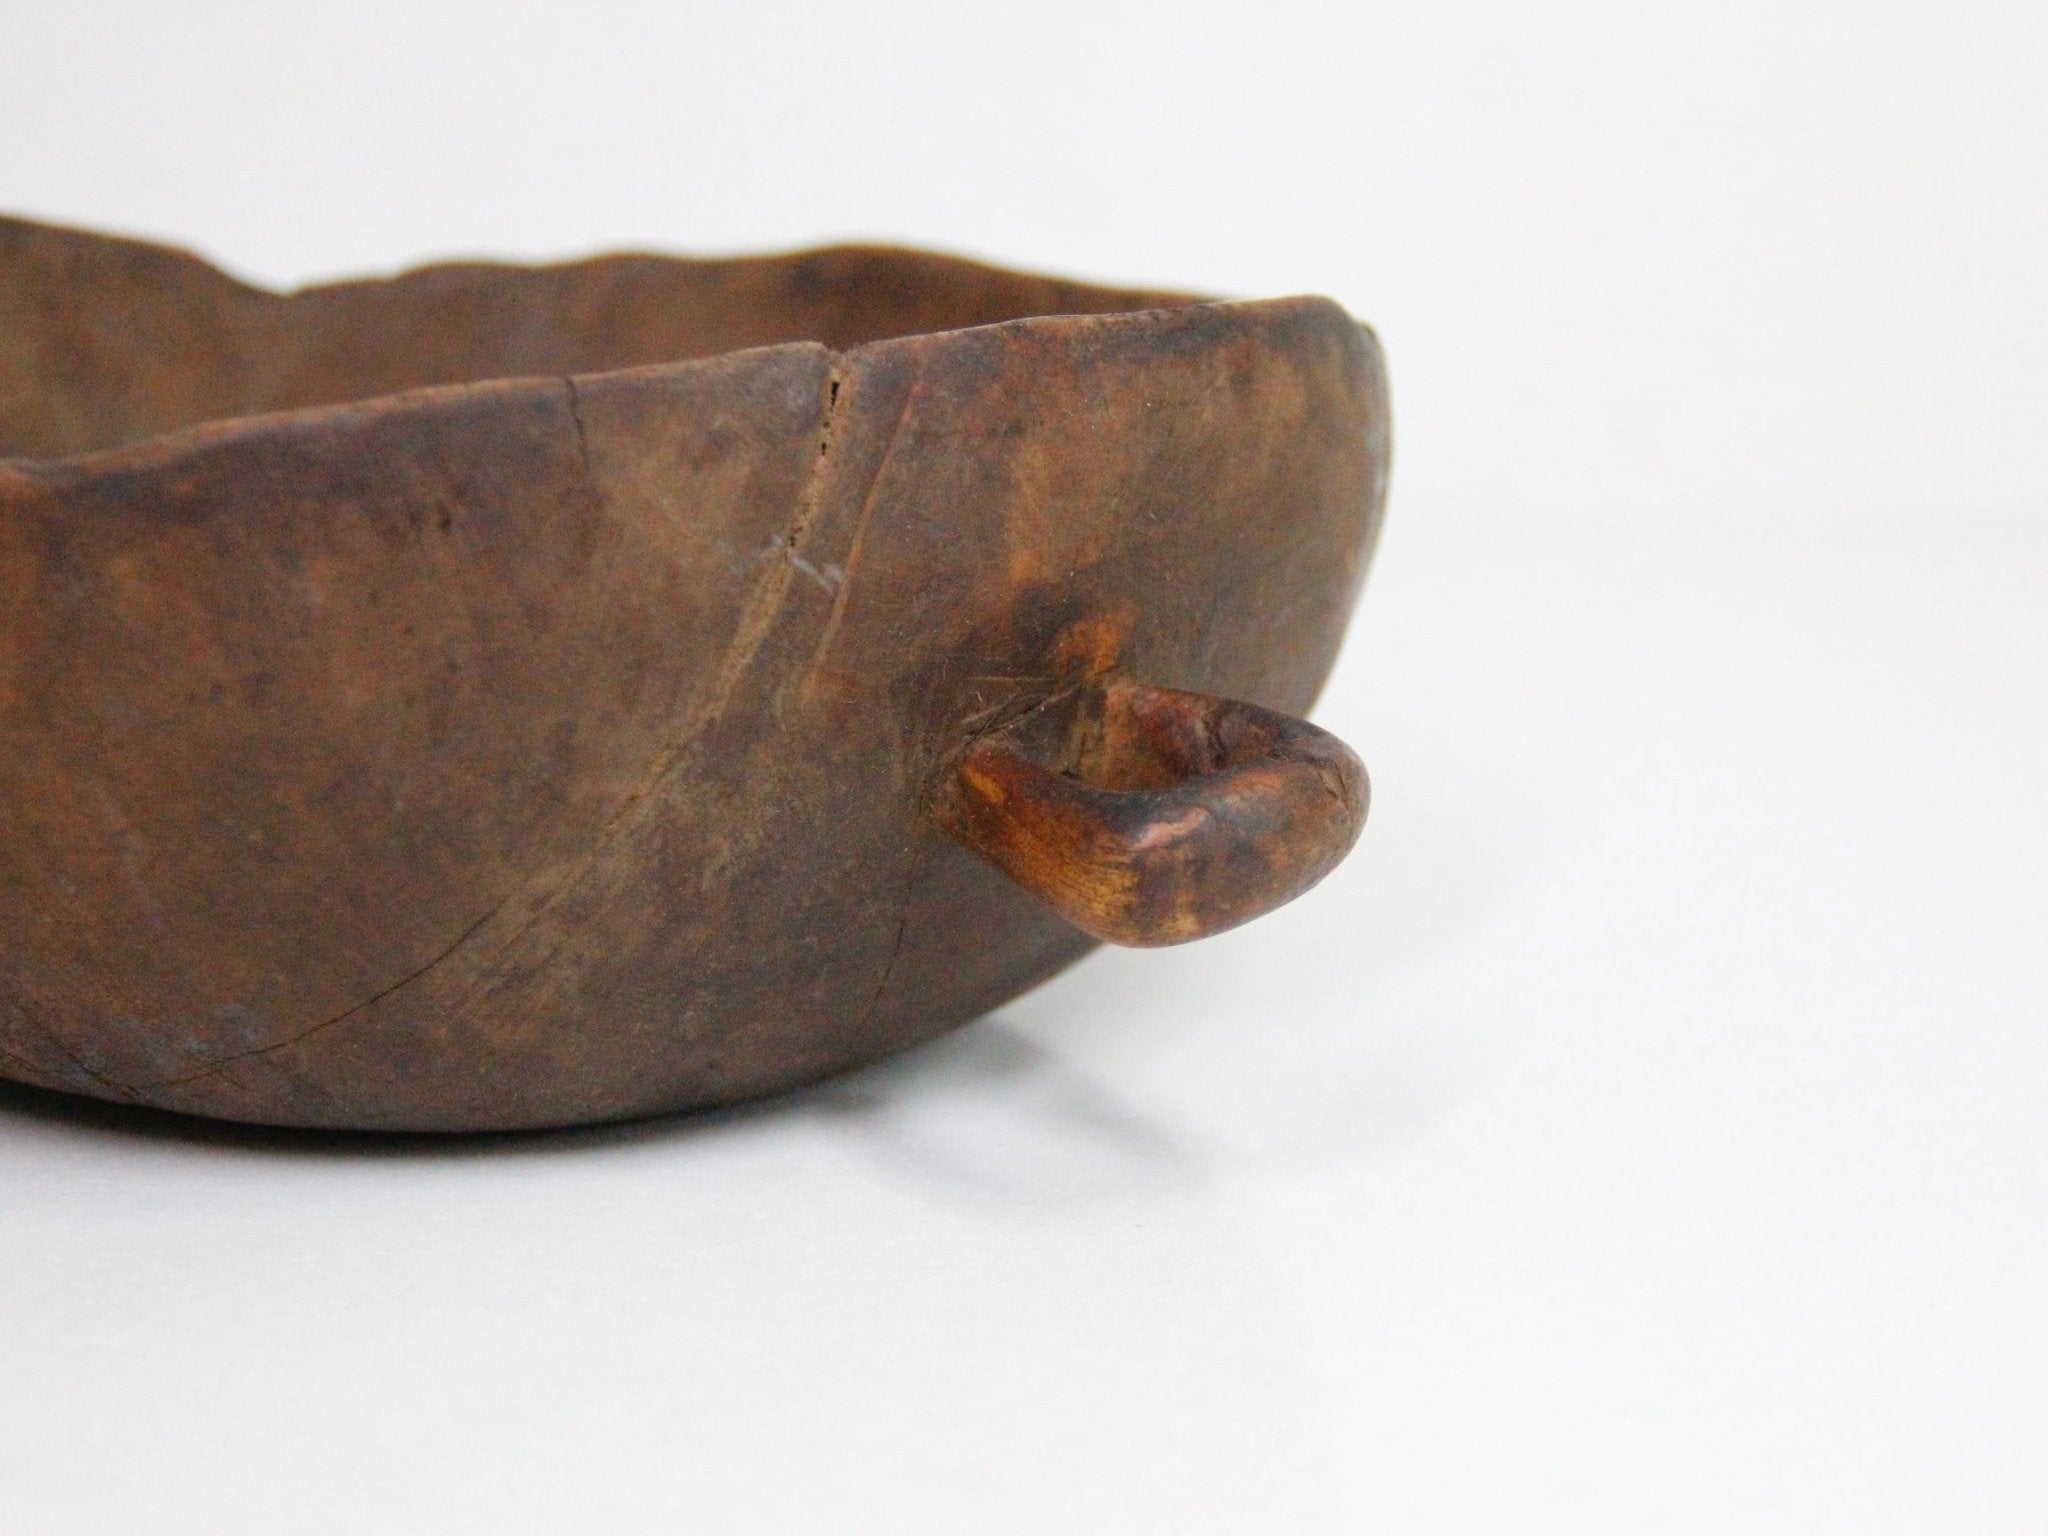 Wooden Bowl Antique | African Two Handles - Debra Hall Lifestyle